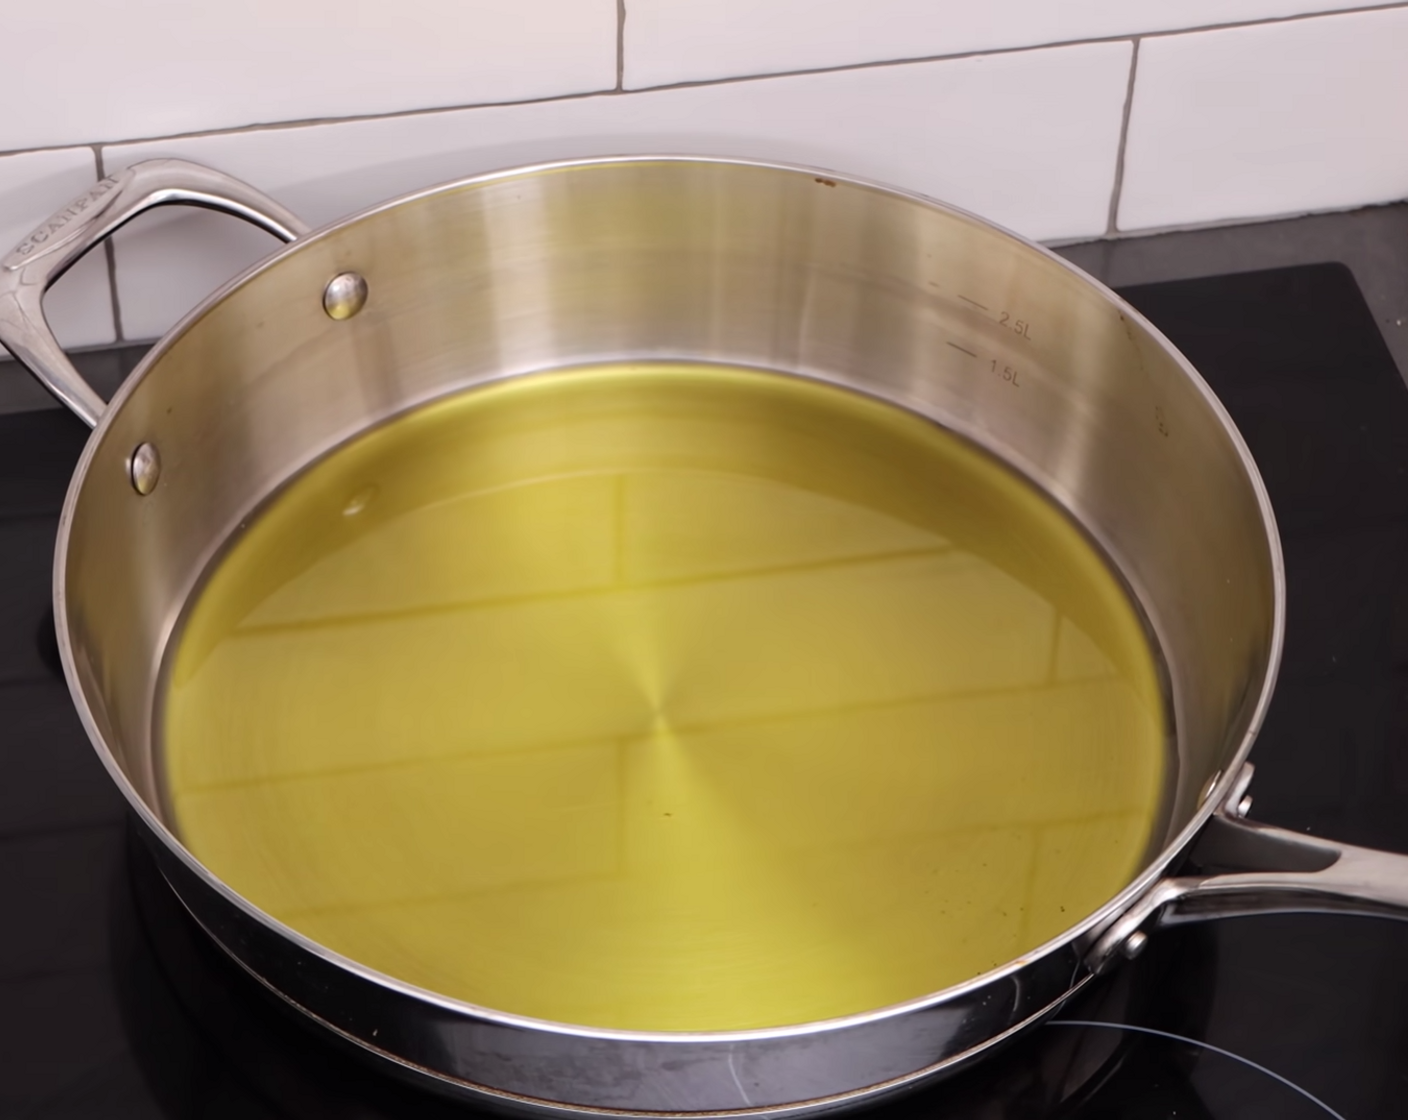 step 4 Place your frying pan on the stove and turn it up to medium heat. Once it has started to warm add a generous amount of Extra-Virgin Olive Oil (1/3 cup), and the garlic, gently mixing it into the oil using a wooden spoon.